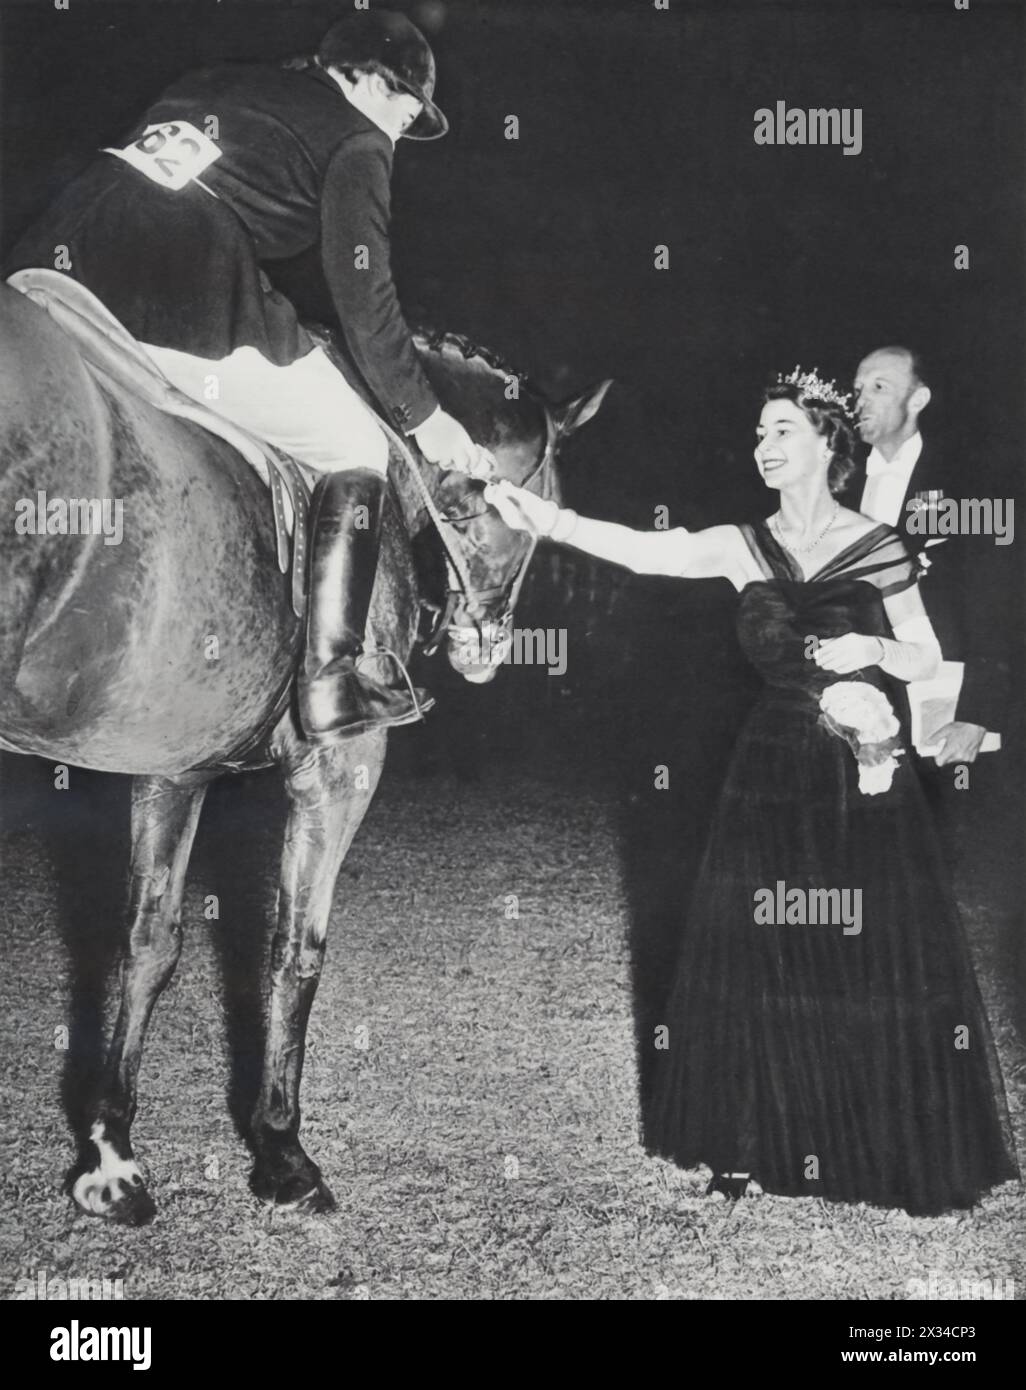 Queen Elizabeth II is captured at the Windsor Horse Show in July 1952, presenting a rosette to horse rider Patricia Ann Moss for her victory in the Ladies versus Gentleman Team Jumping Championship. Known for her love of horses, Elizabeth frequently attended horse shows. Patricia Ann Moss later distinguished herself as one of the most successful female rally drivers of all time. Stock Photo